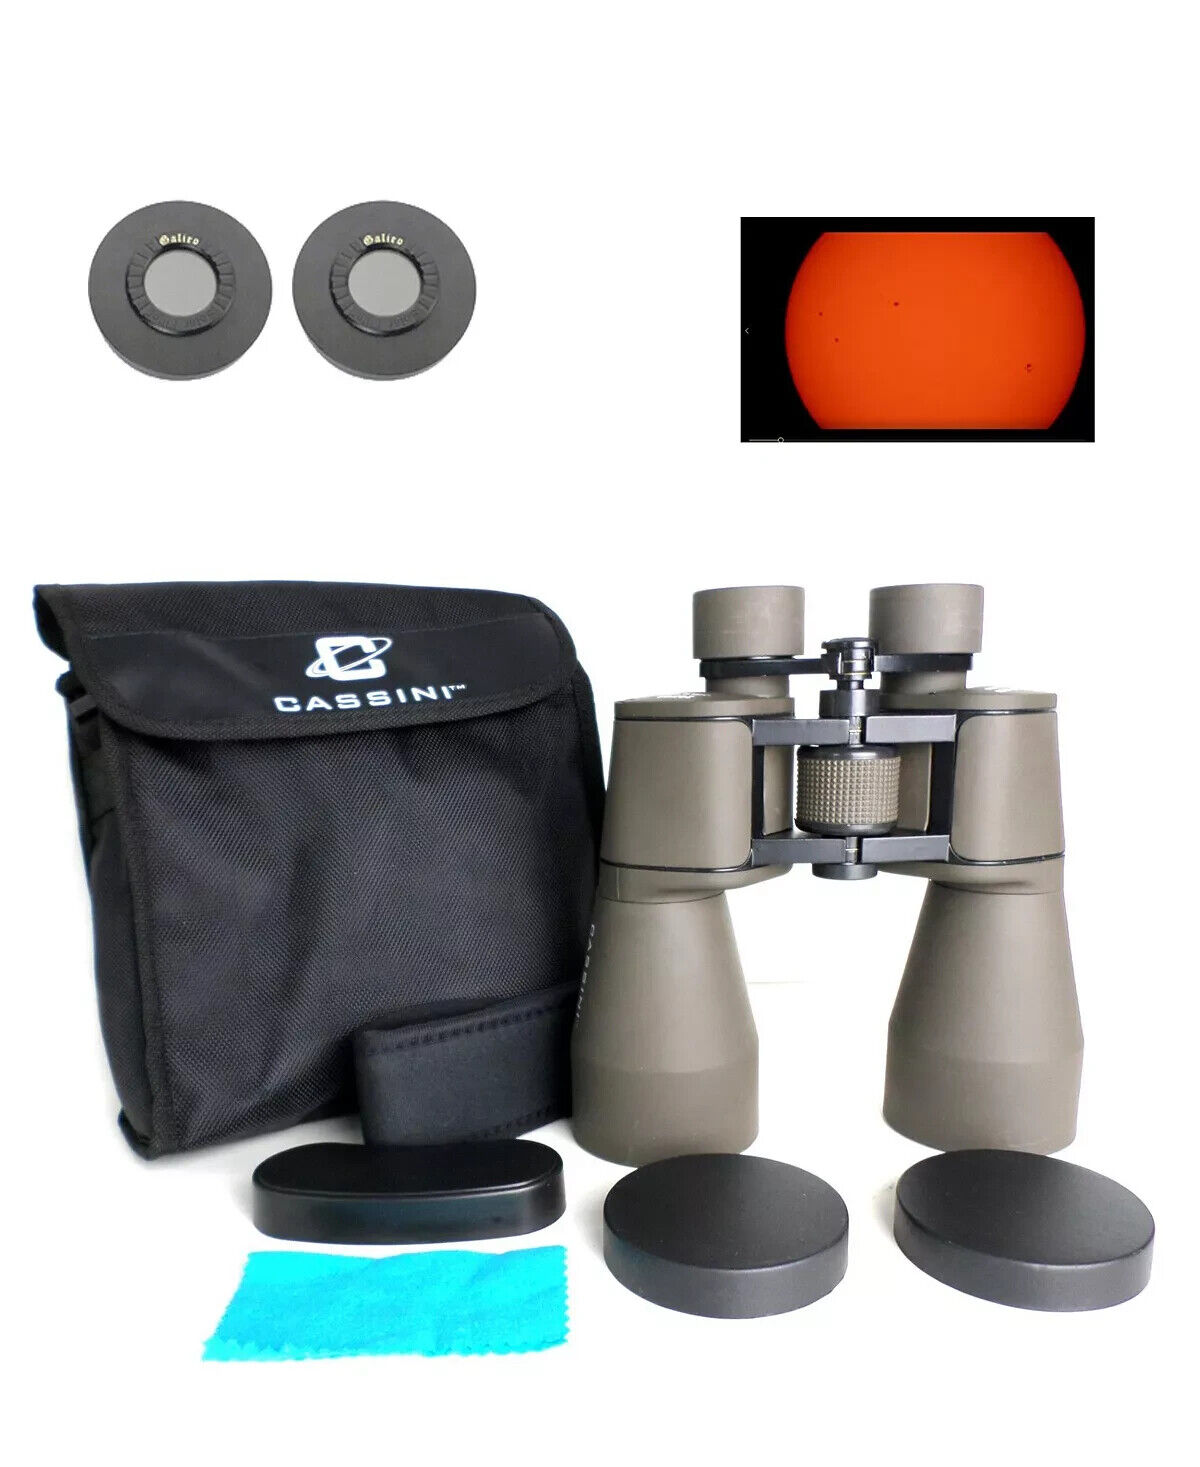 CASSINI 20x 60mm Binocular and Shoulder Case with Solar Filter Caps